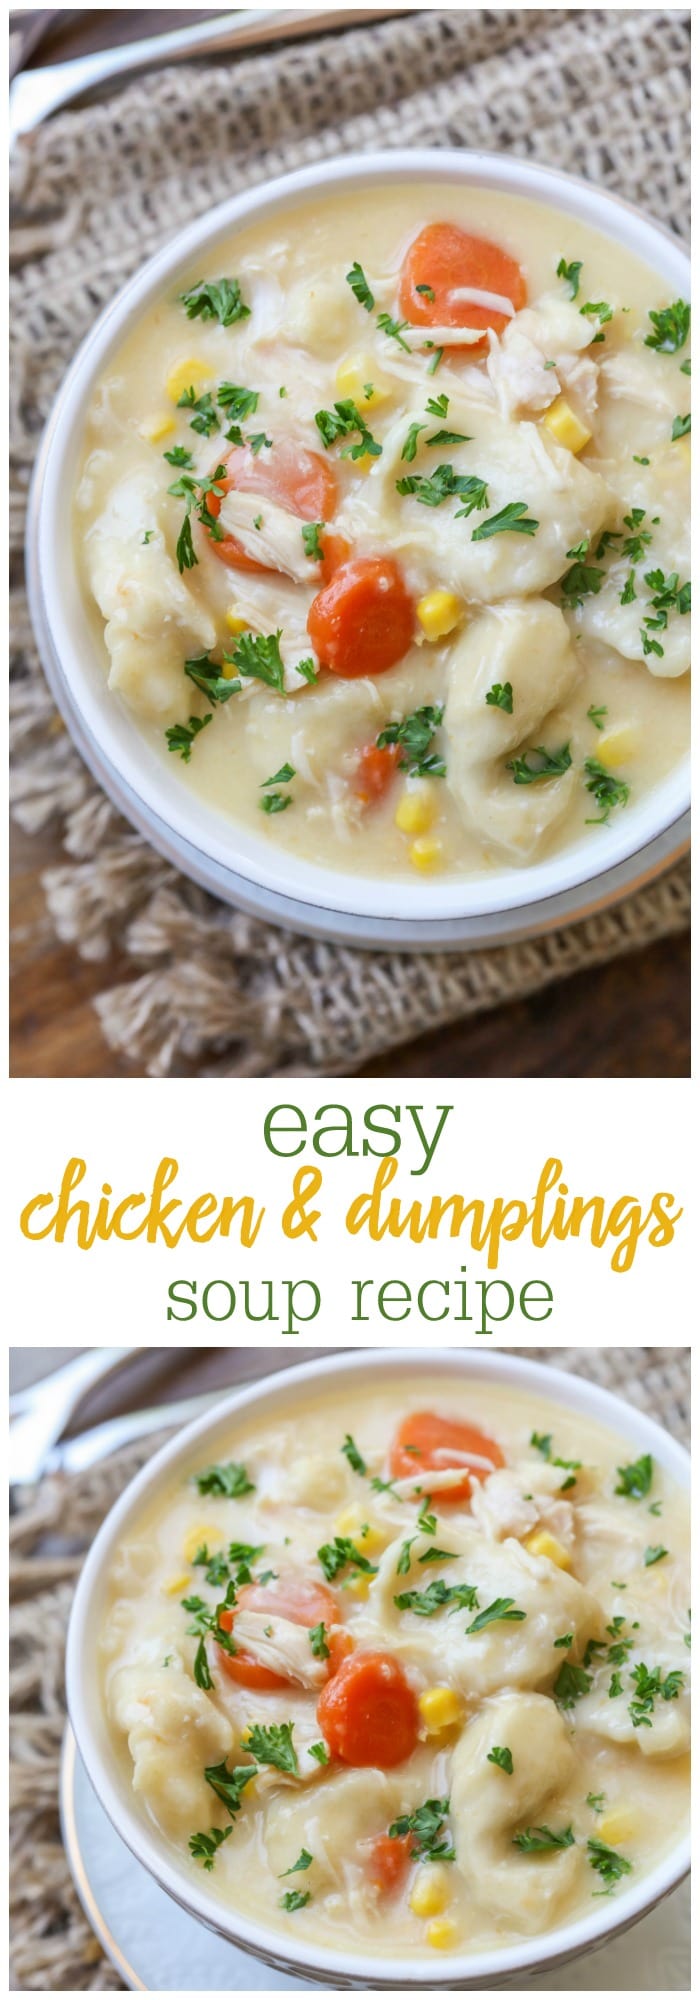 Campbell Soup Chicken And Dumpling Recipe : Chicken and dumpling soup